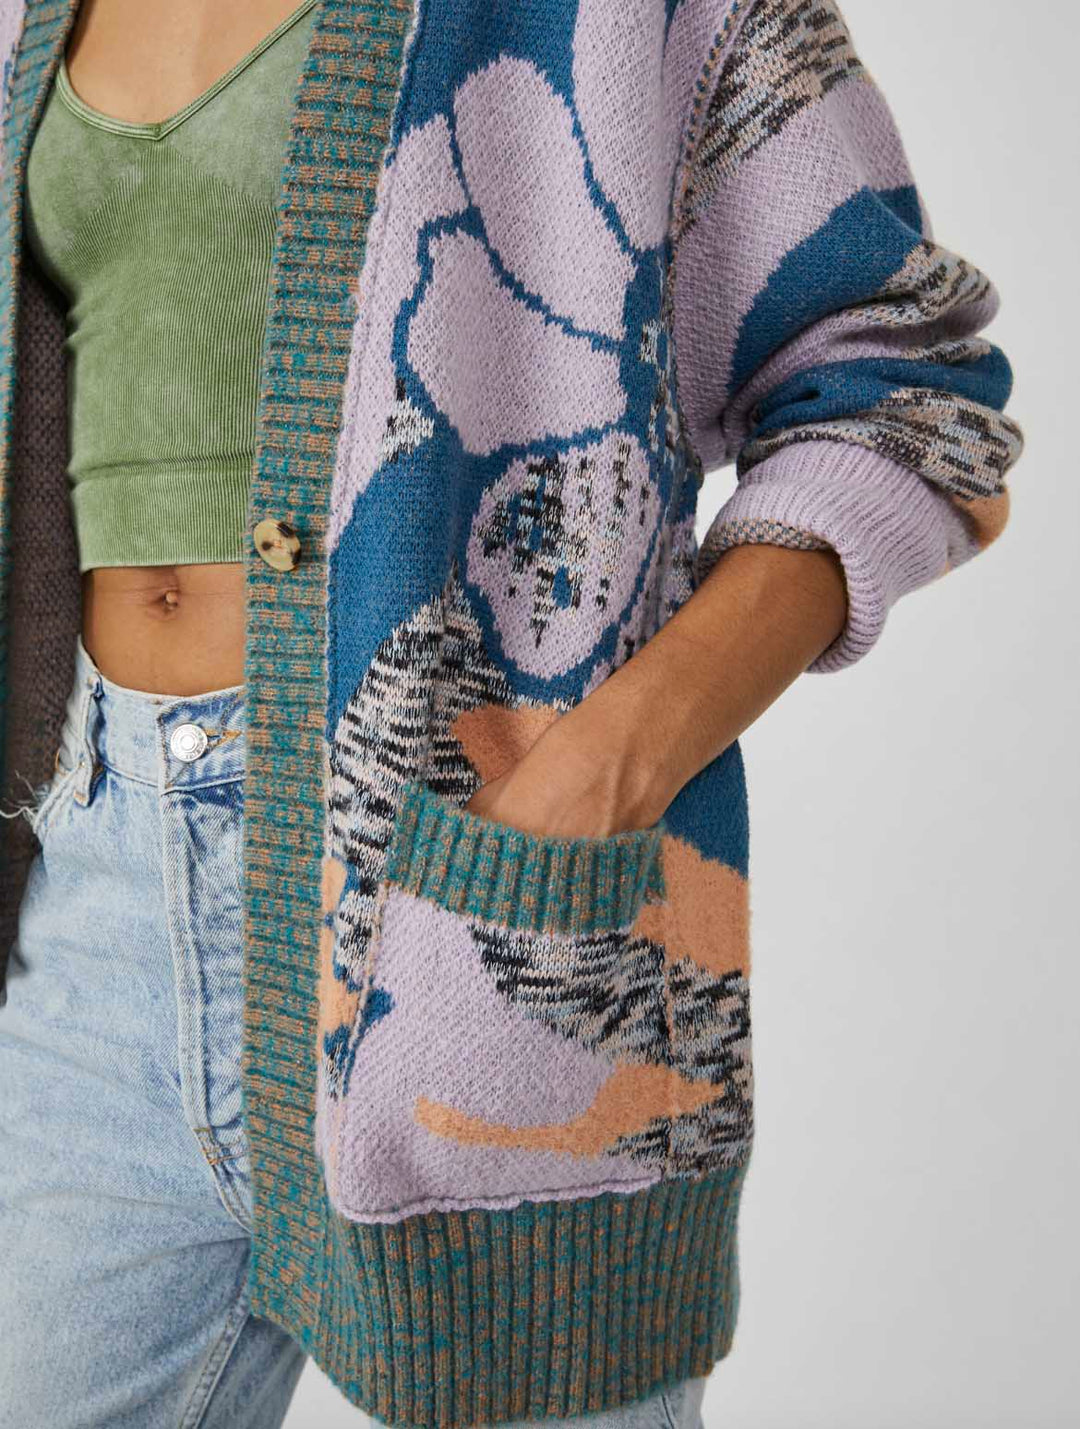 AUGUST CARDIGAN - ORCHID TEAL COMBO